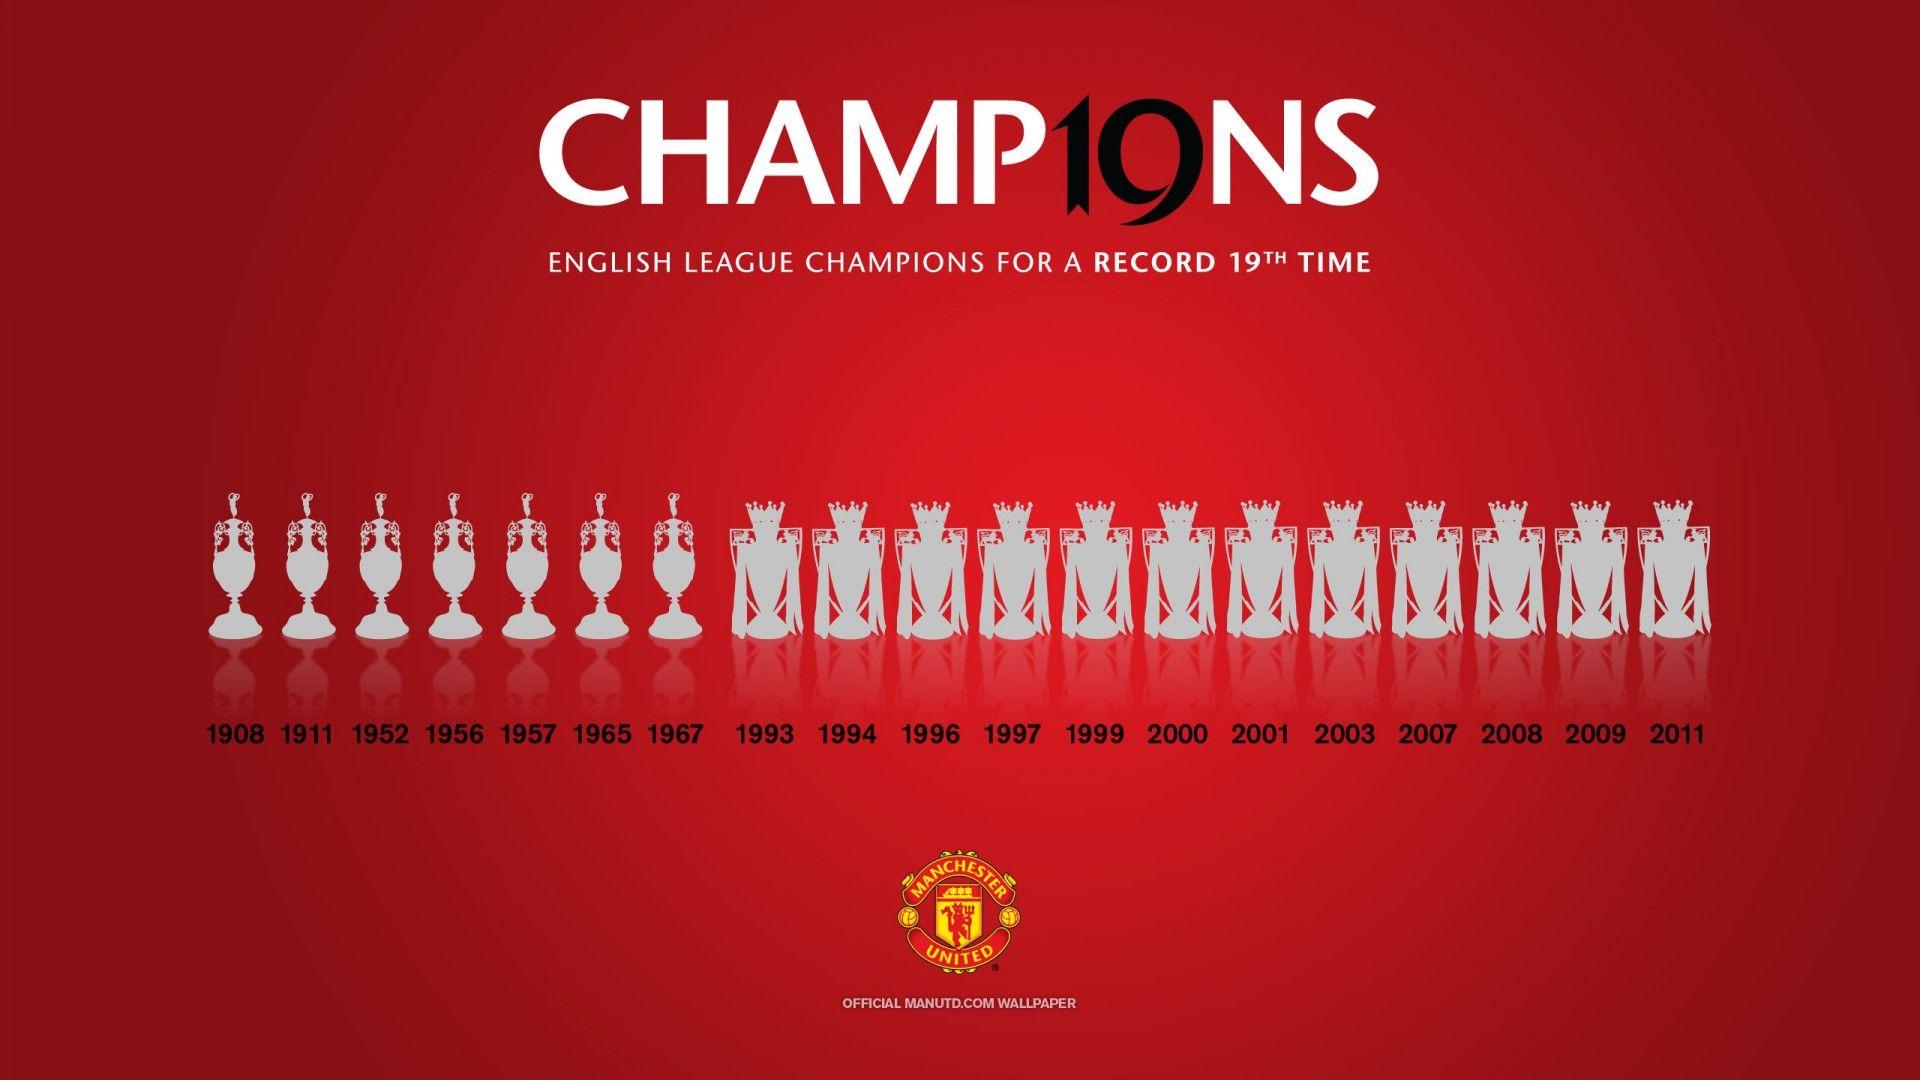 Manchester United 4k Wallpapers Wallpaper Cave